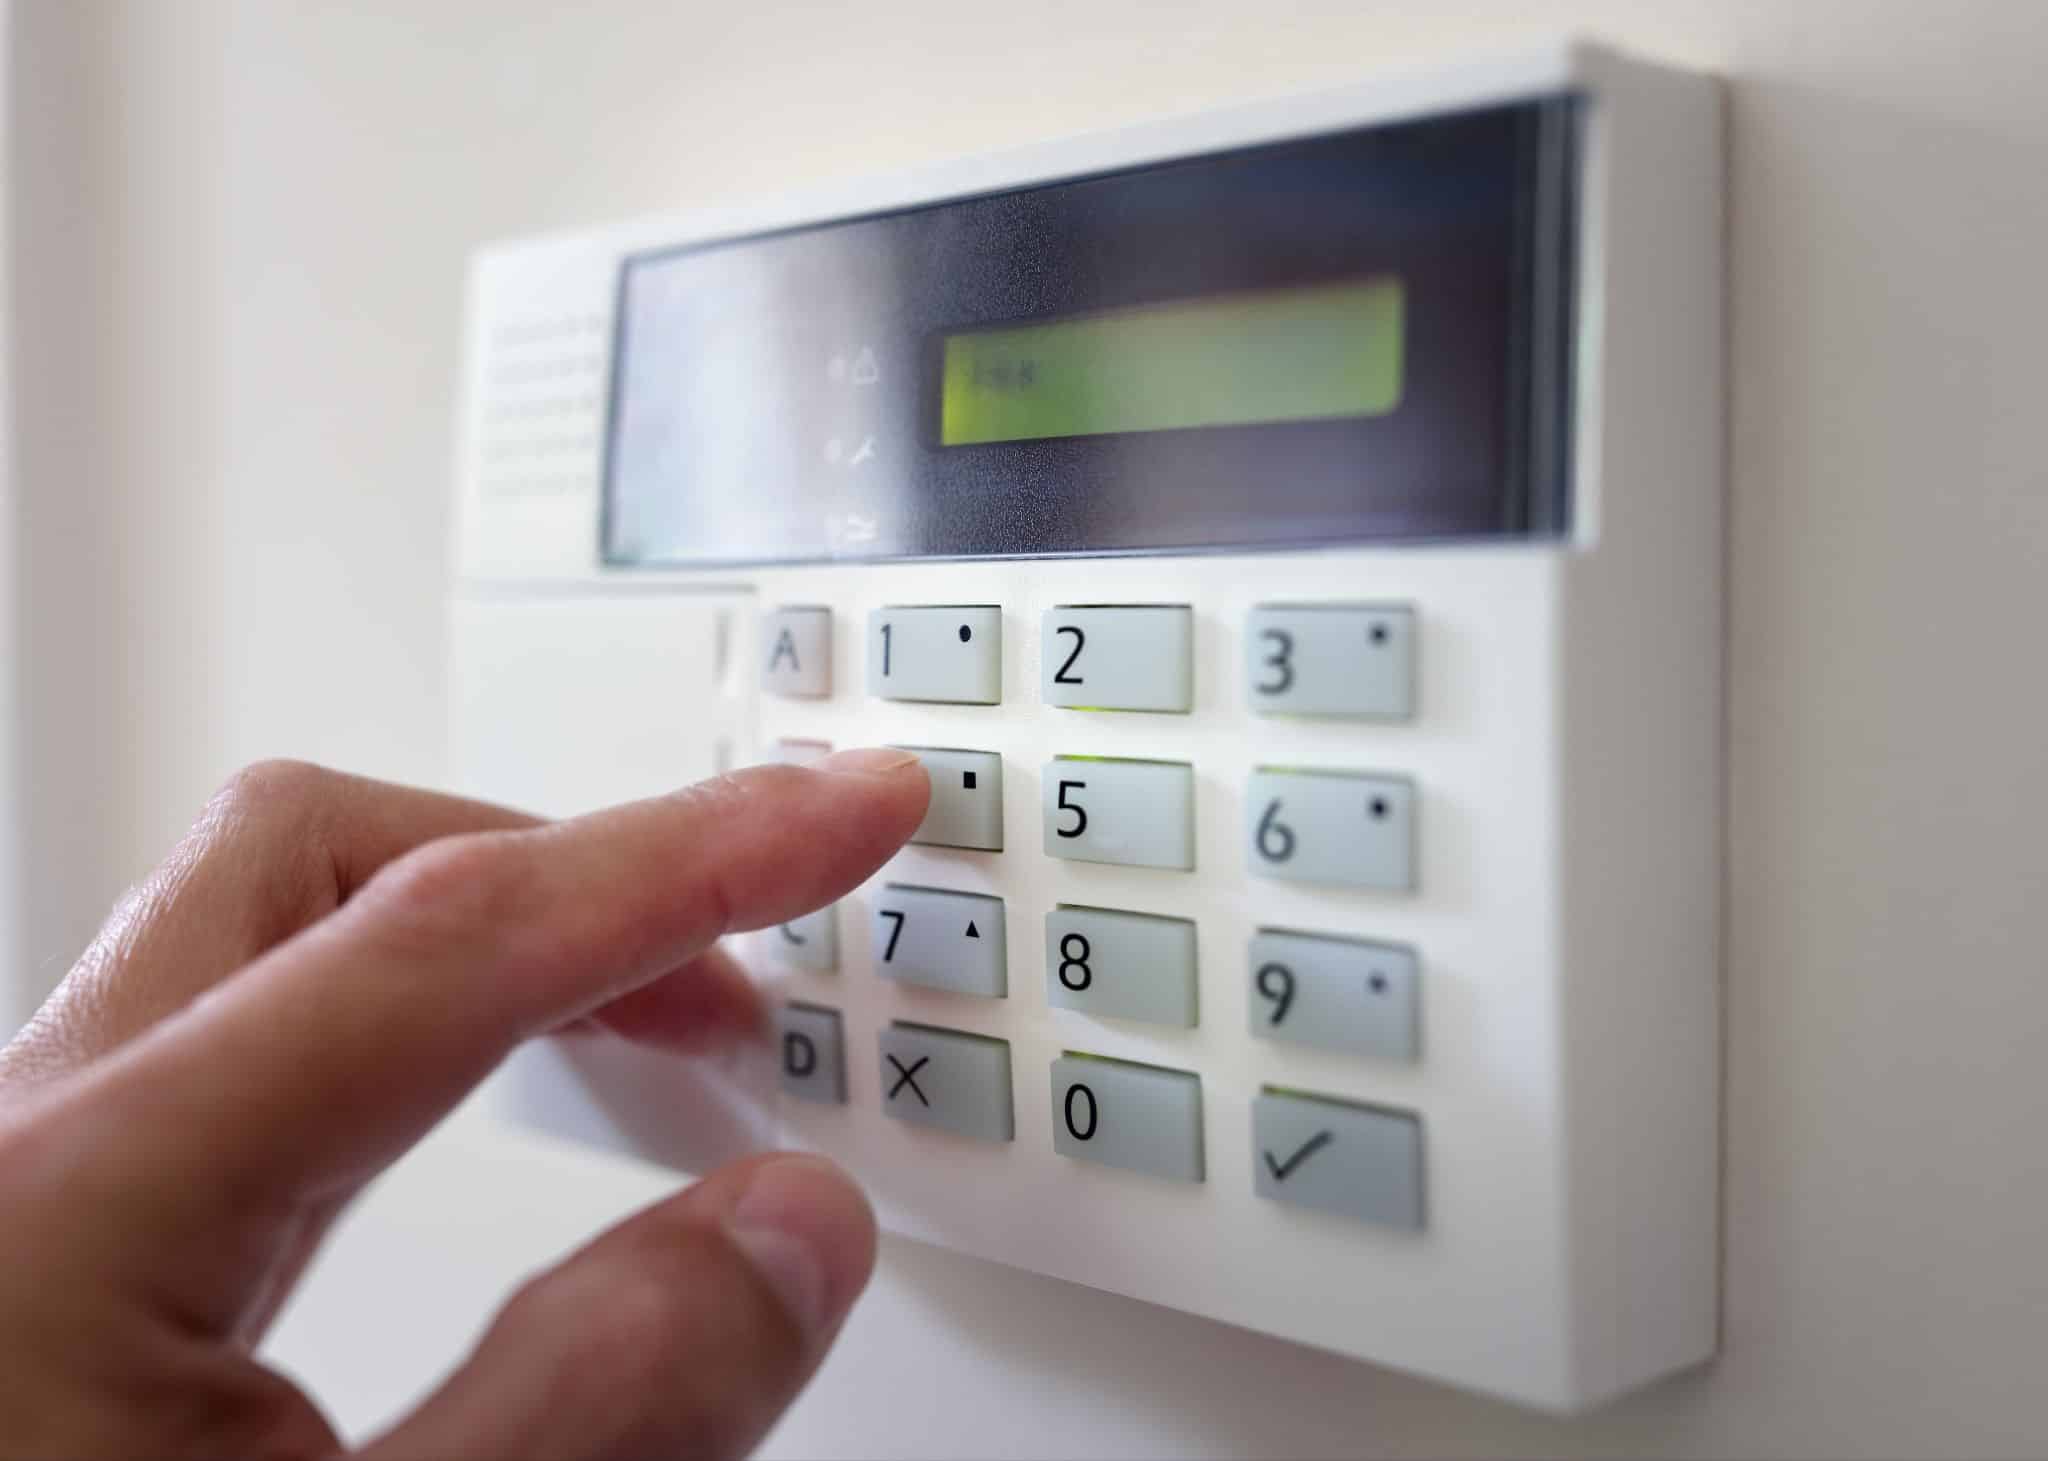 keypad for security systems